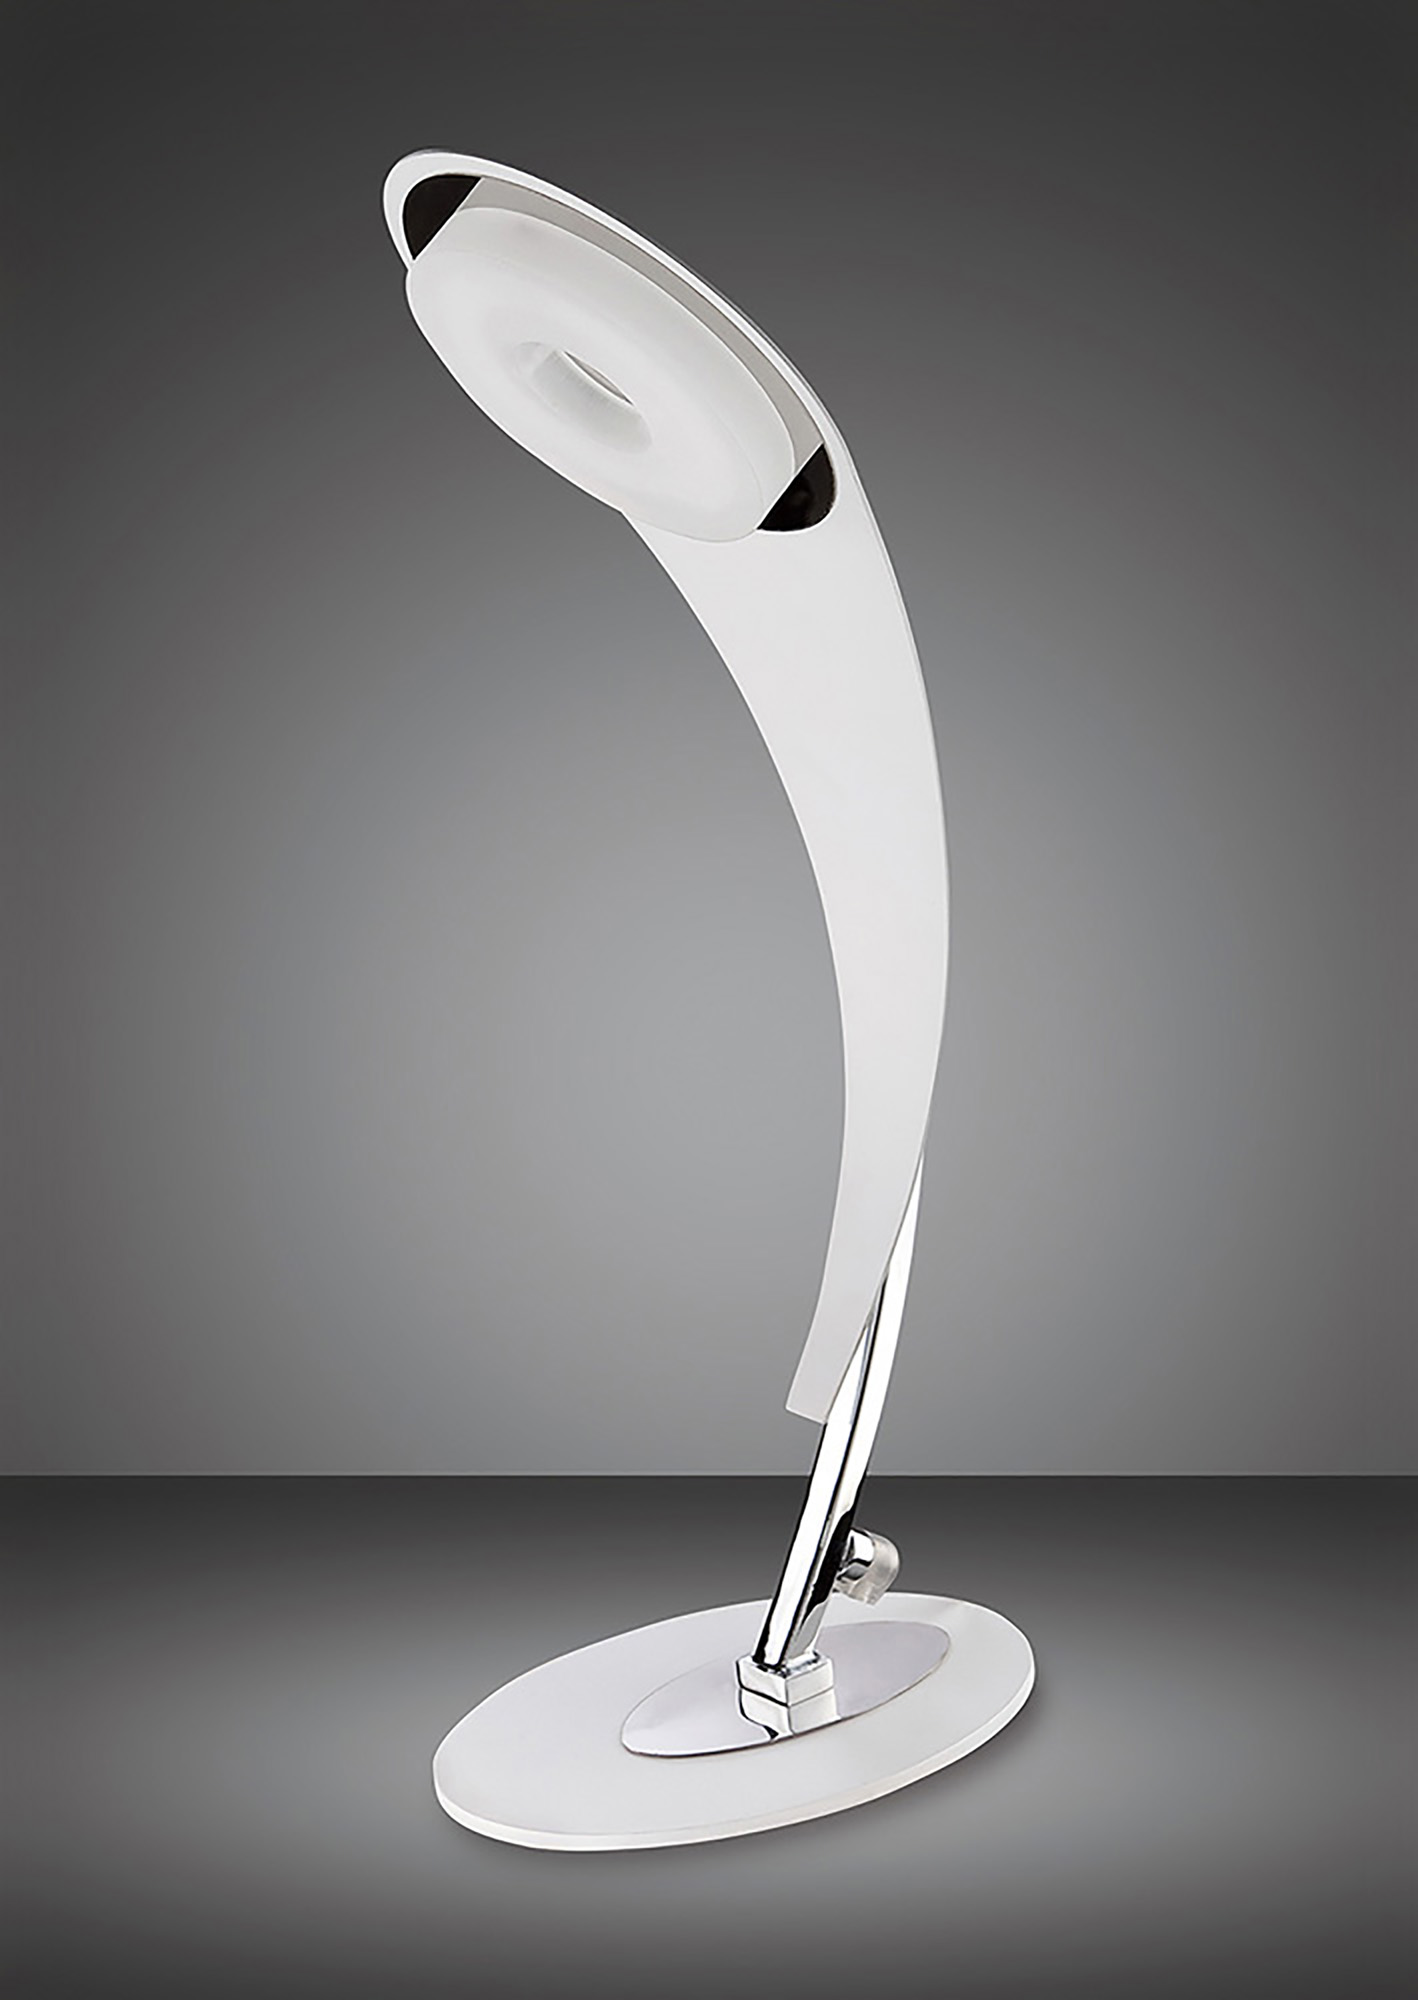 Tess Table Lamps Mantra Fusion Desk & Task Lamps